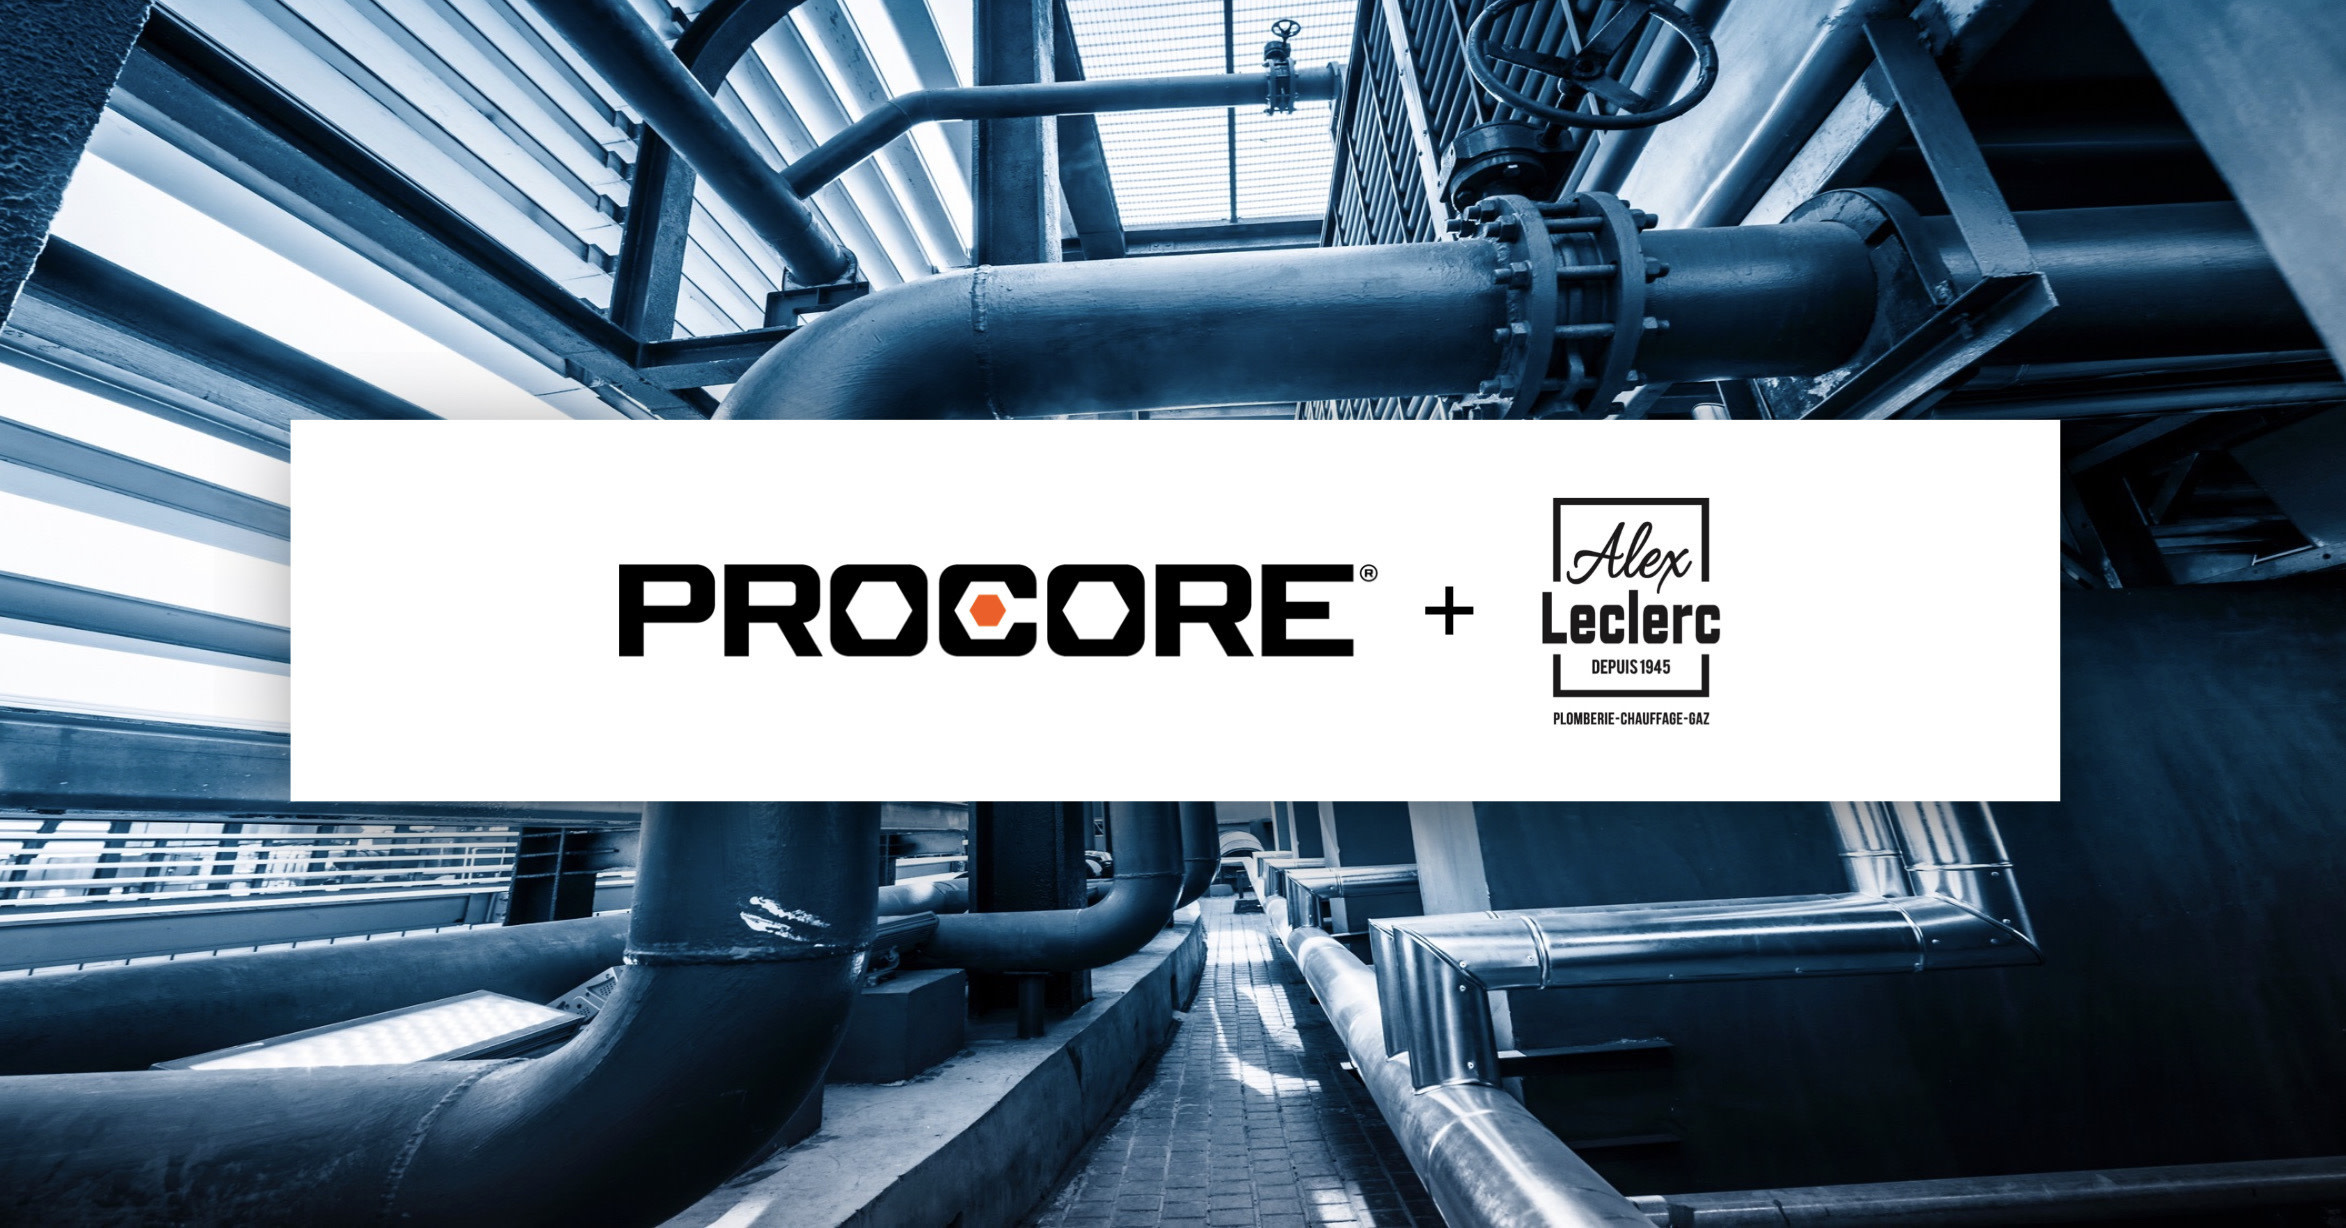 Procore + Alex Lecrerc logo lock up superimposed on an image of pipes